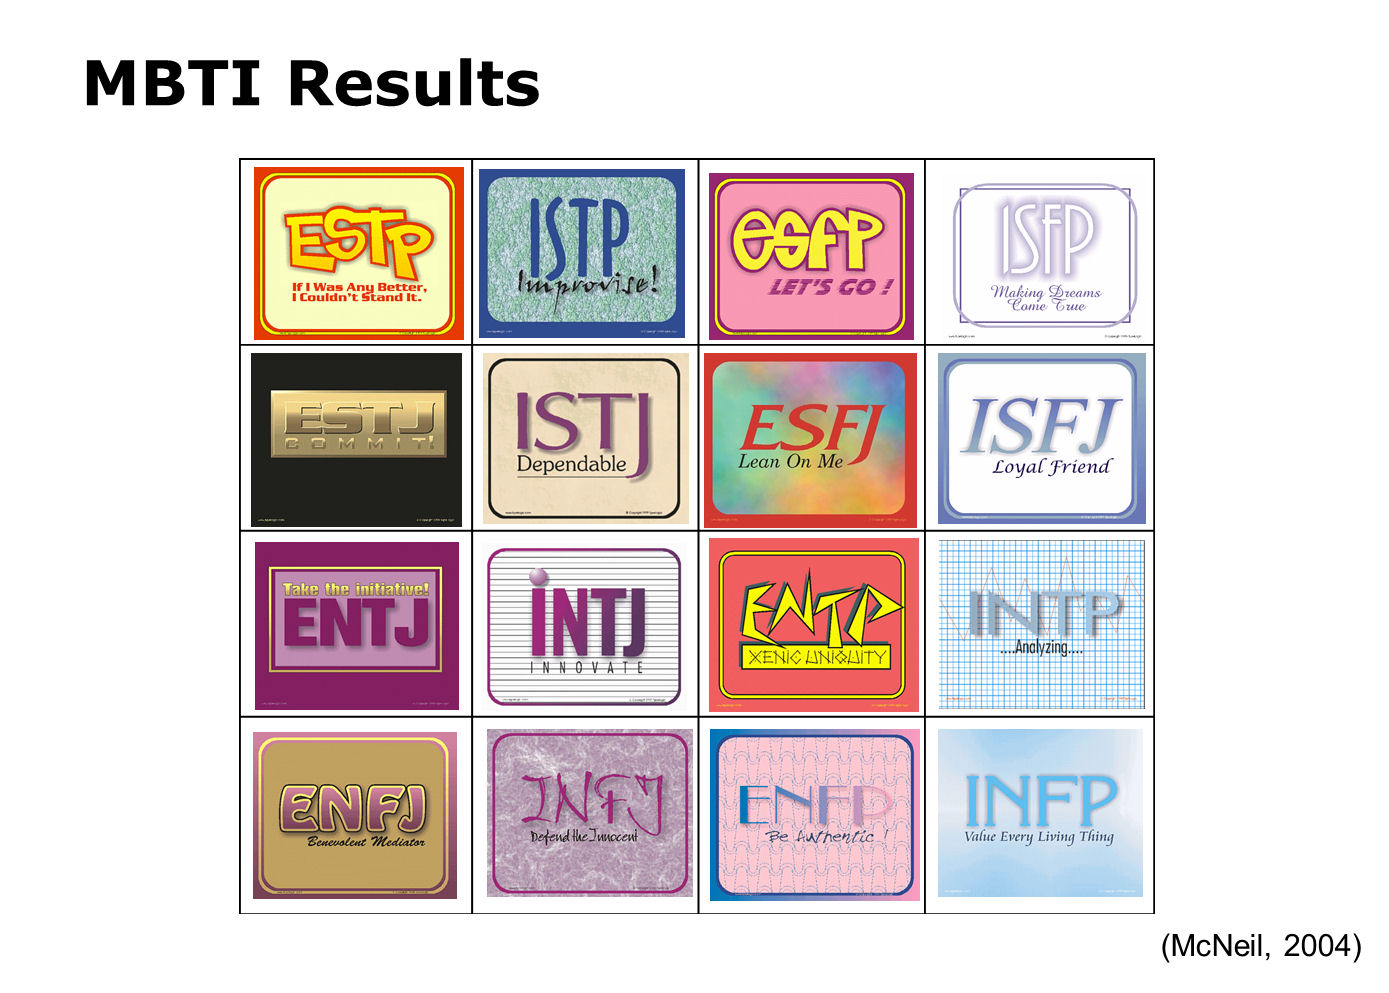 I did an MBTI test some years ago and got INTP as a result. After